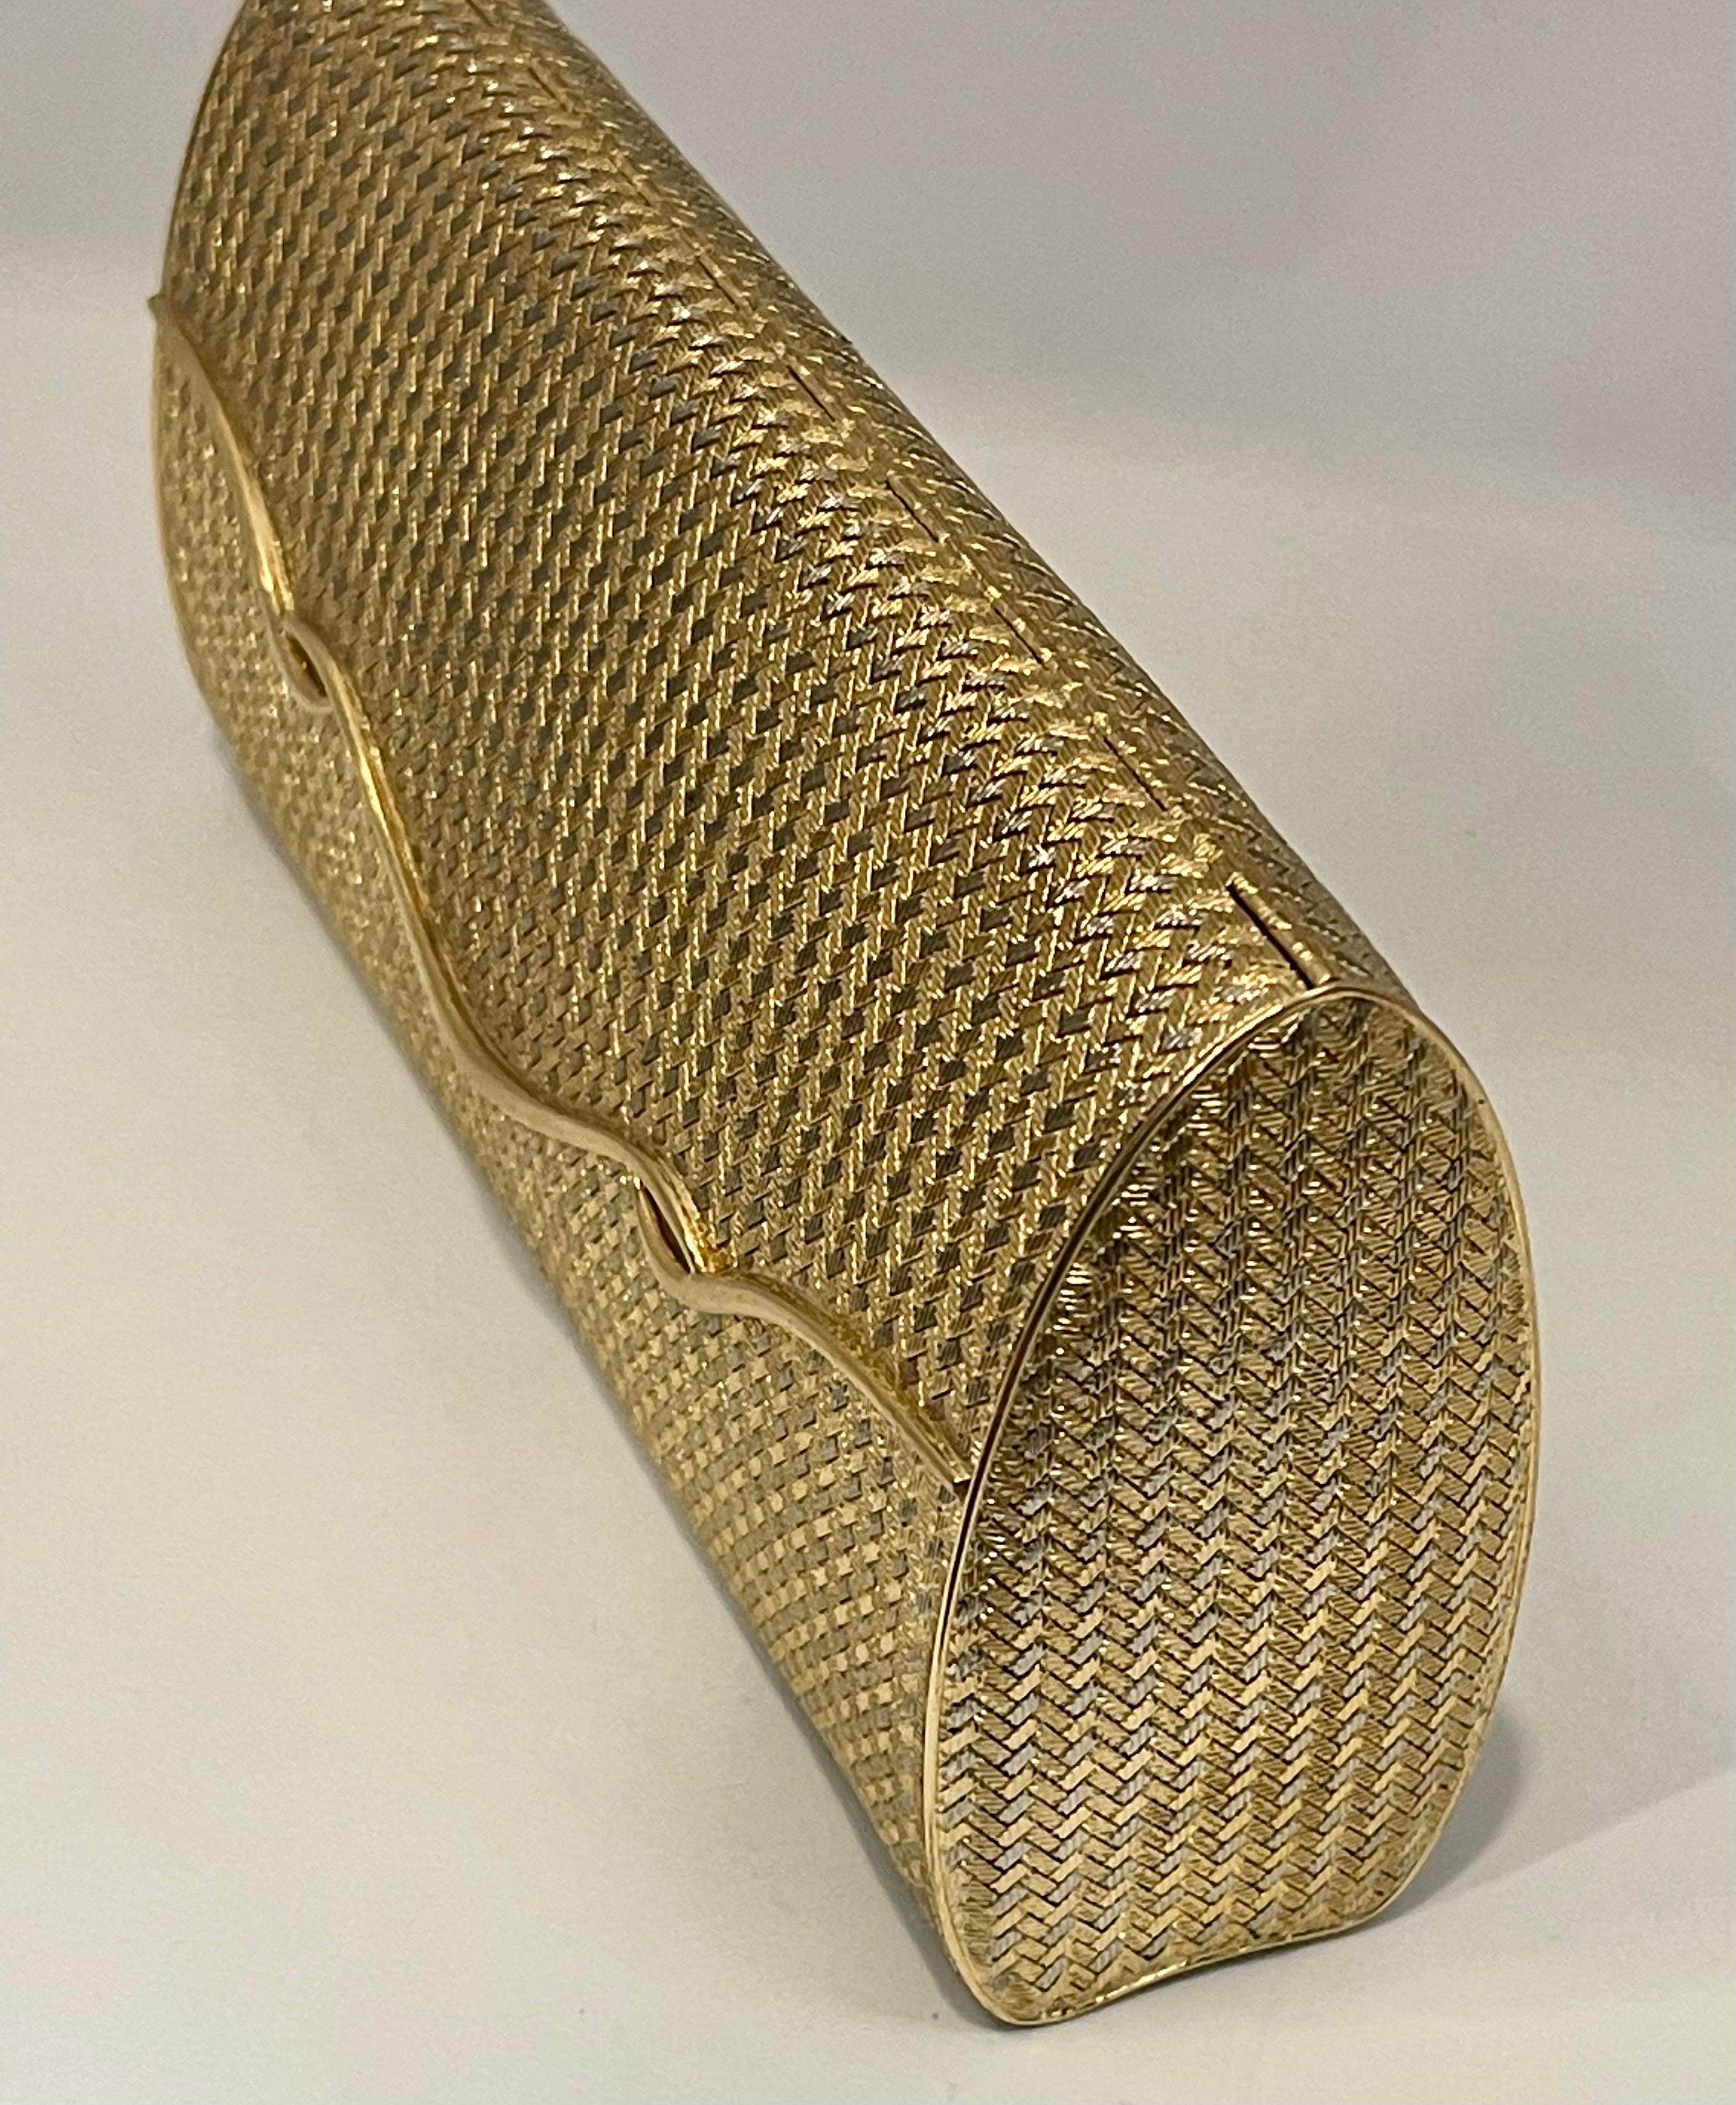 STUNNING AND RARE! 
This exquisite Vintage Clutch Purse from the 1960s was designed with a soft textured woven style,  Van Cleef and Arpels  crafted in solid  18K White and yellow gold .
Meticulously crafted 18 karat yellow gold mesh clutch. A